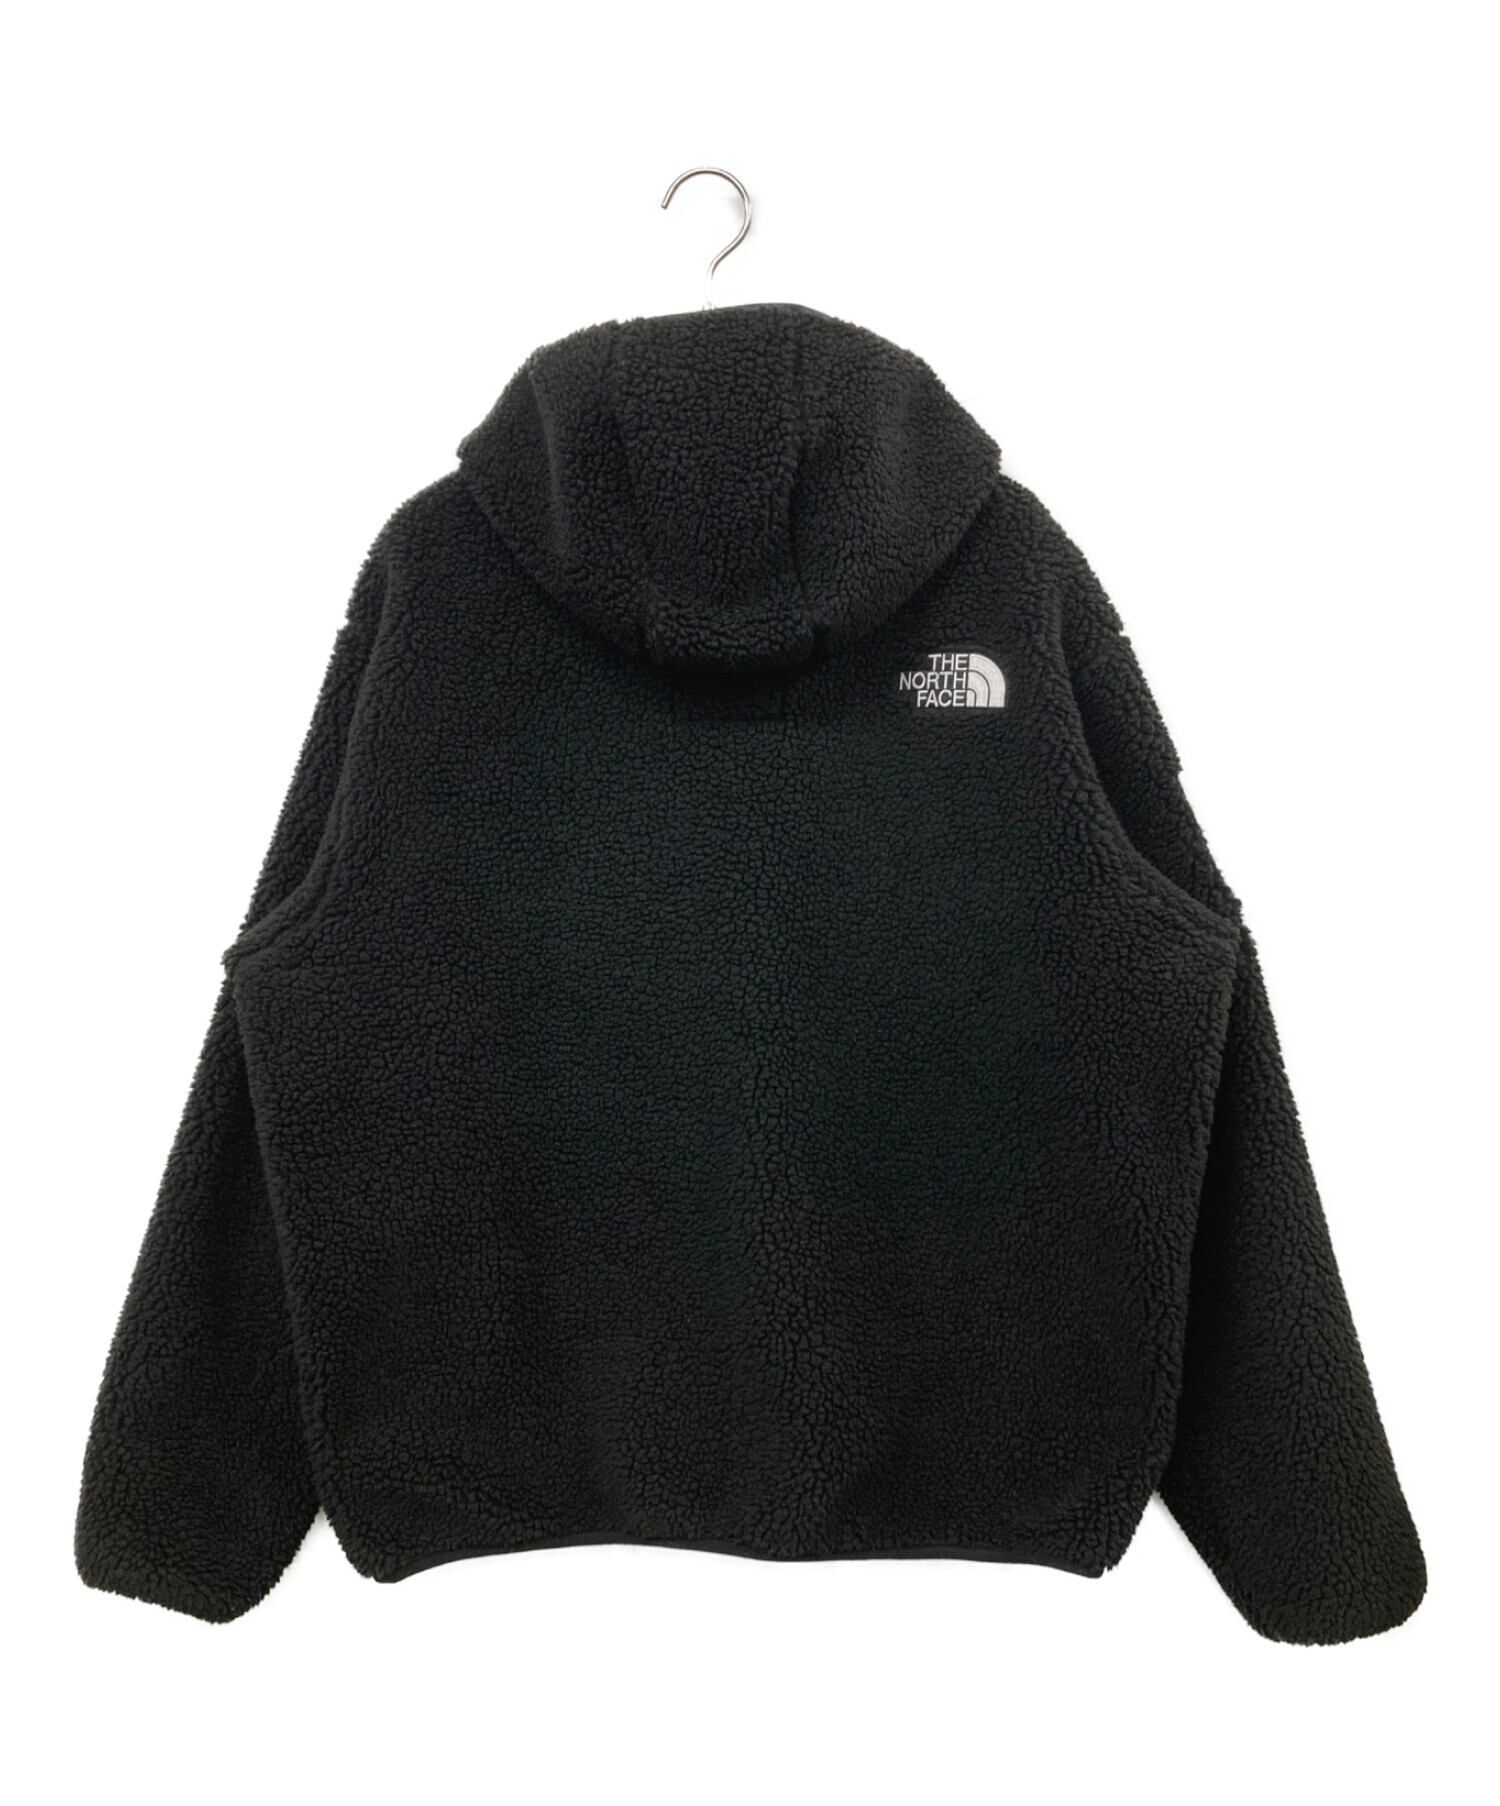 Superme the north face S logo hoodedメンズ